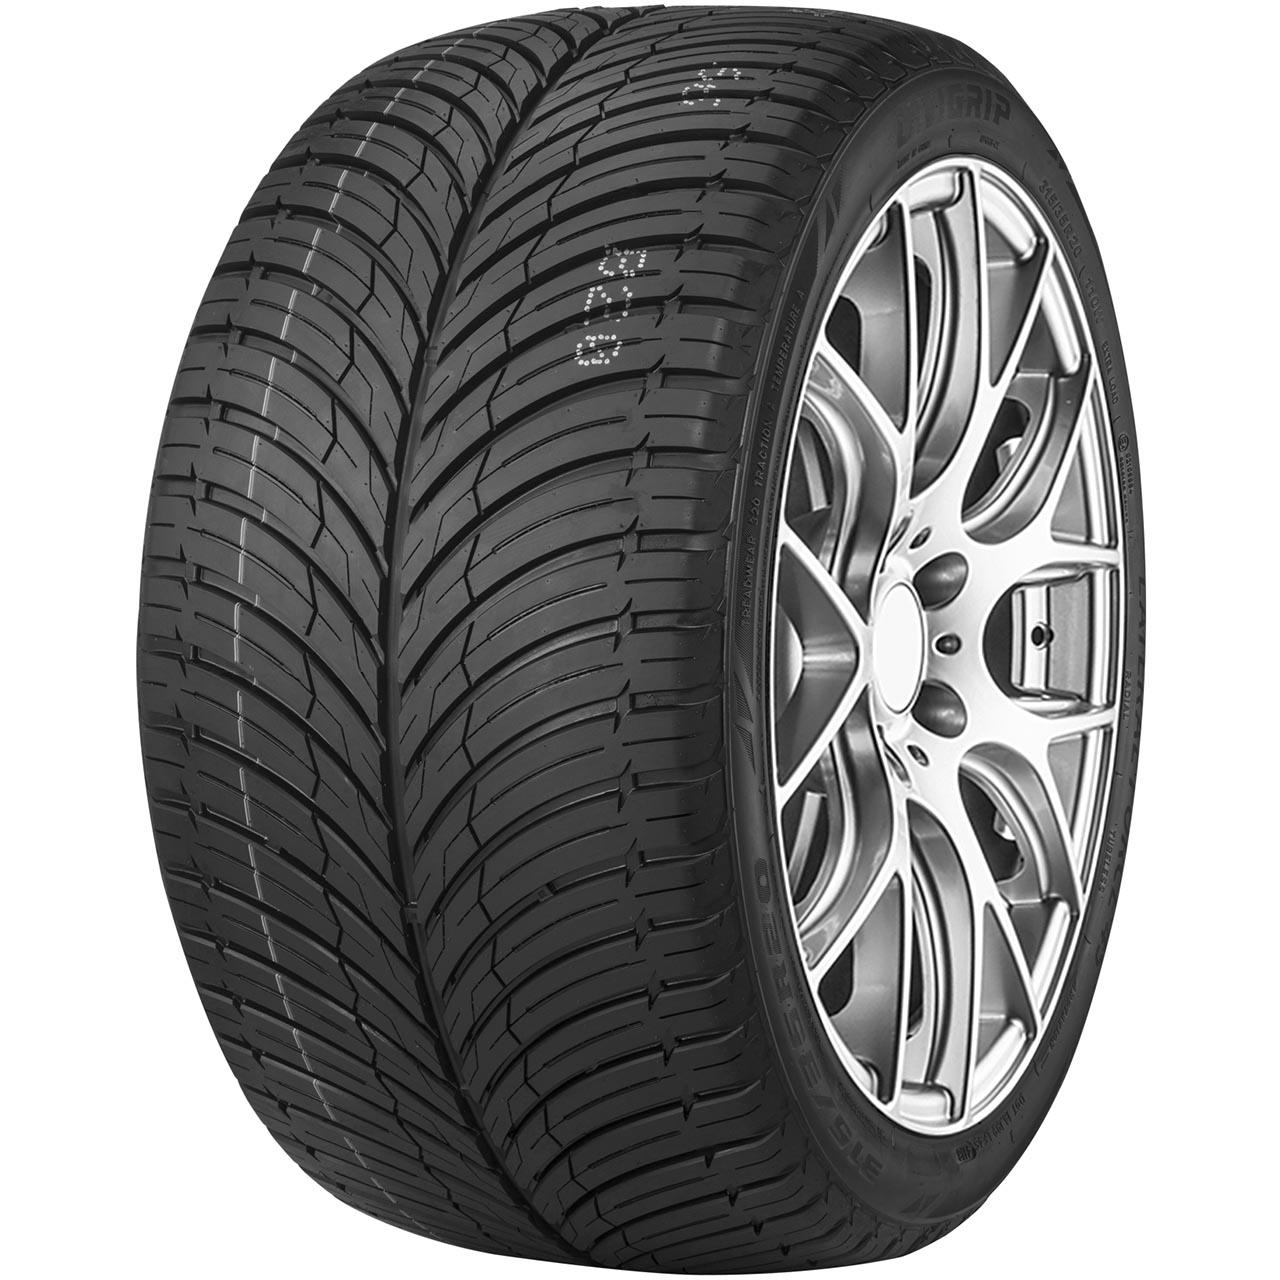 Unigrip Lateral Force 4S 245/45R19 102W XL